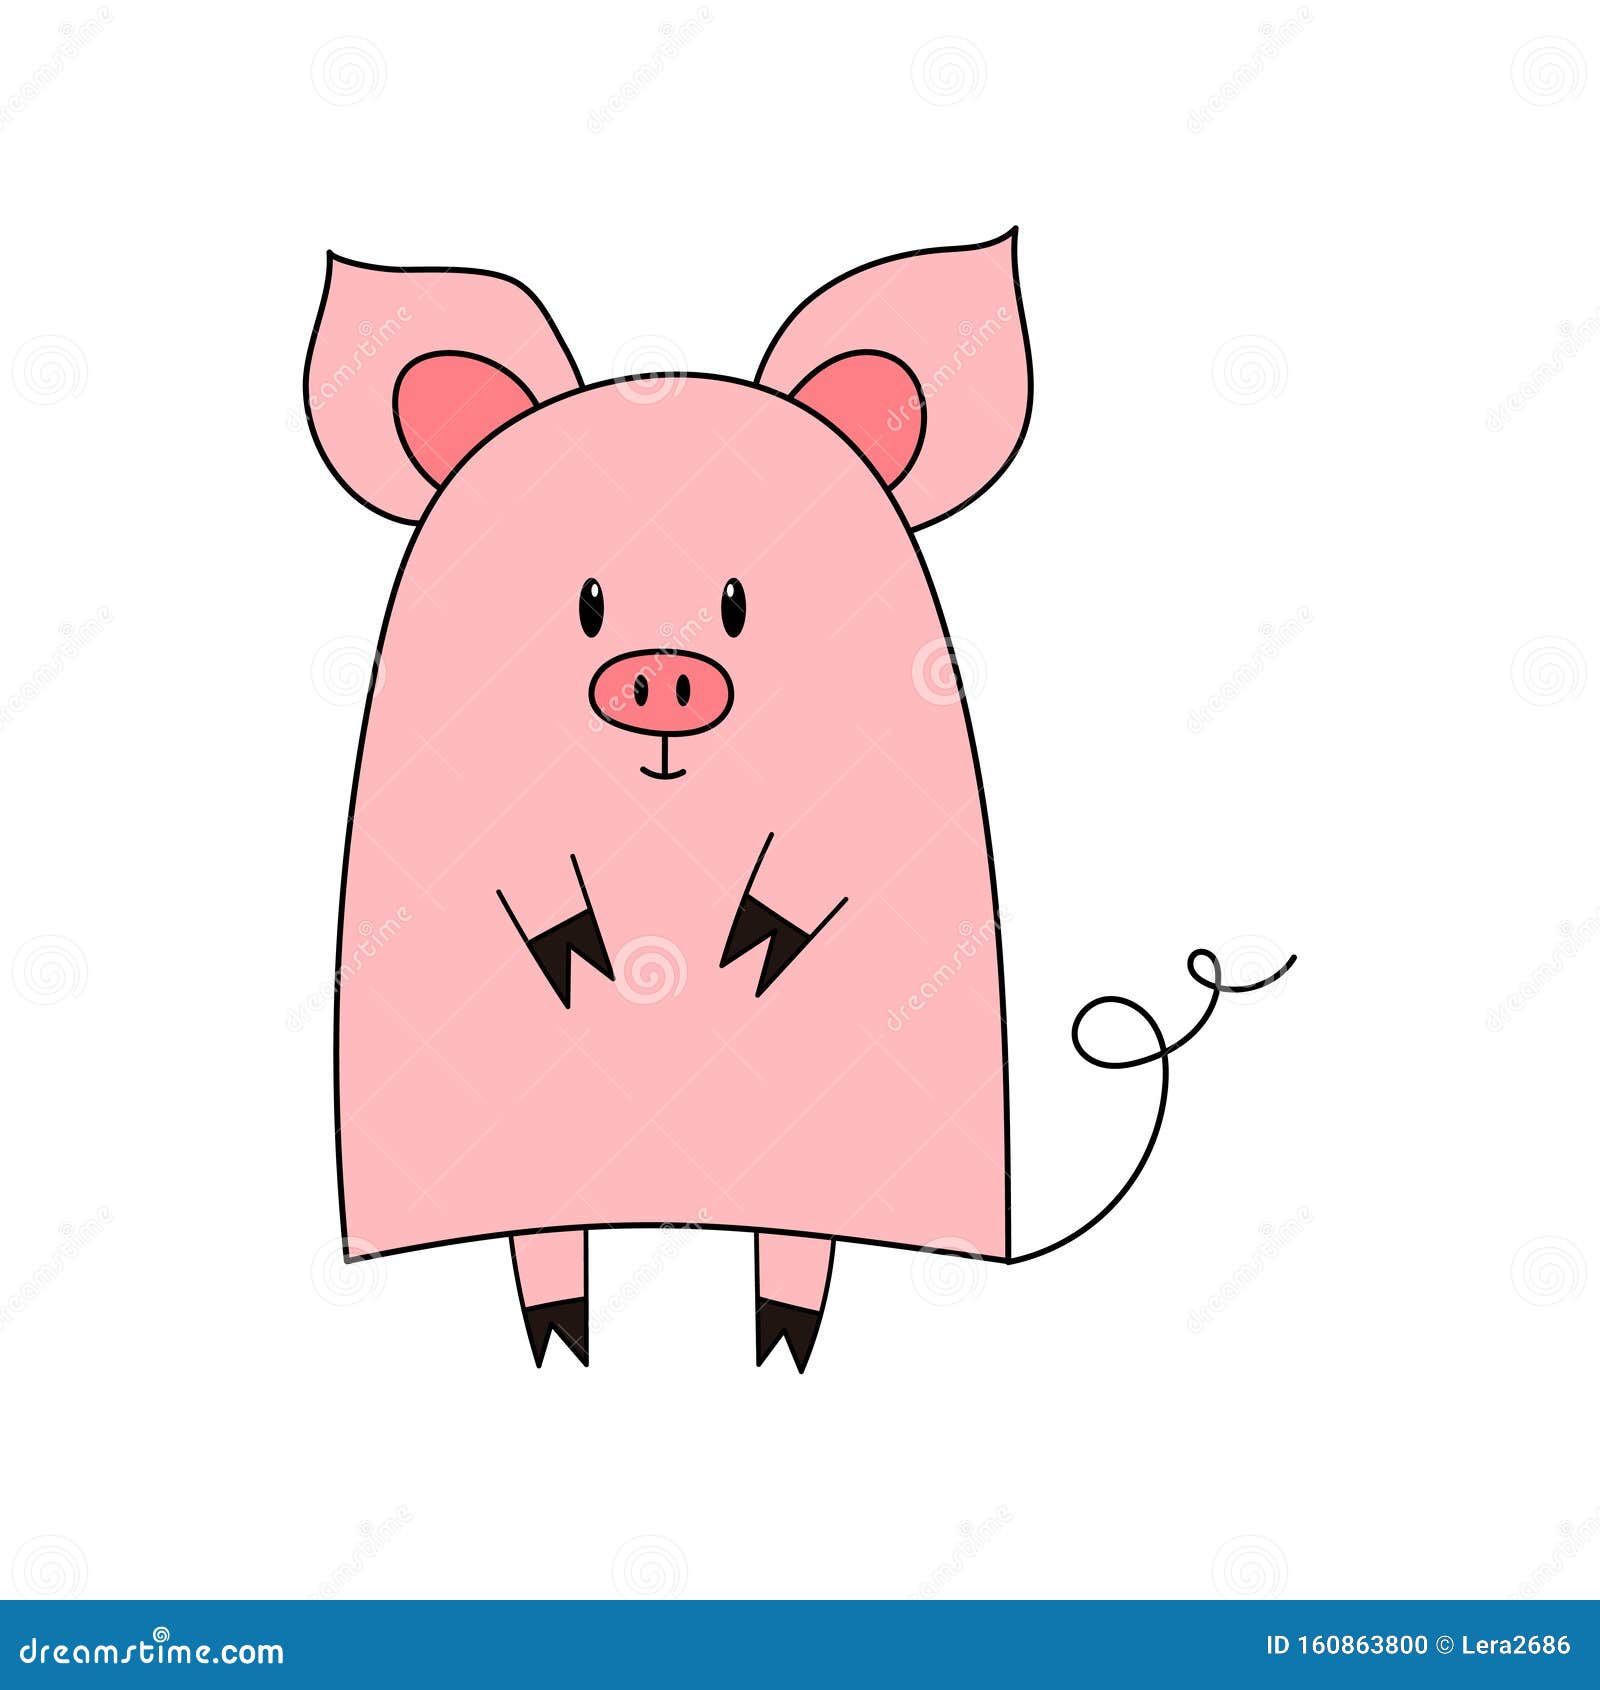 Premium Vector  Hand drawn kids drawing cartoon vector illustration cute  pig icon isolated on white background